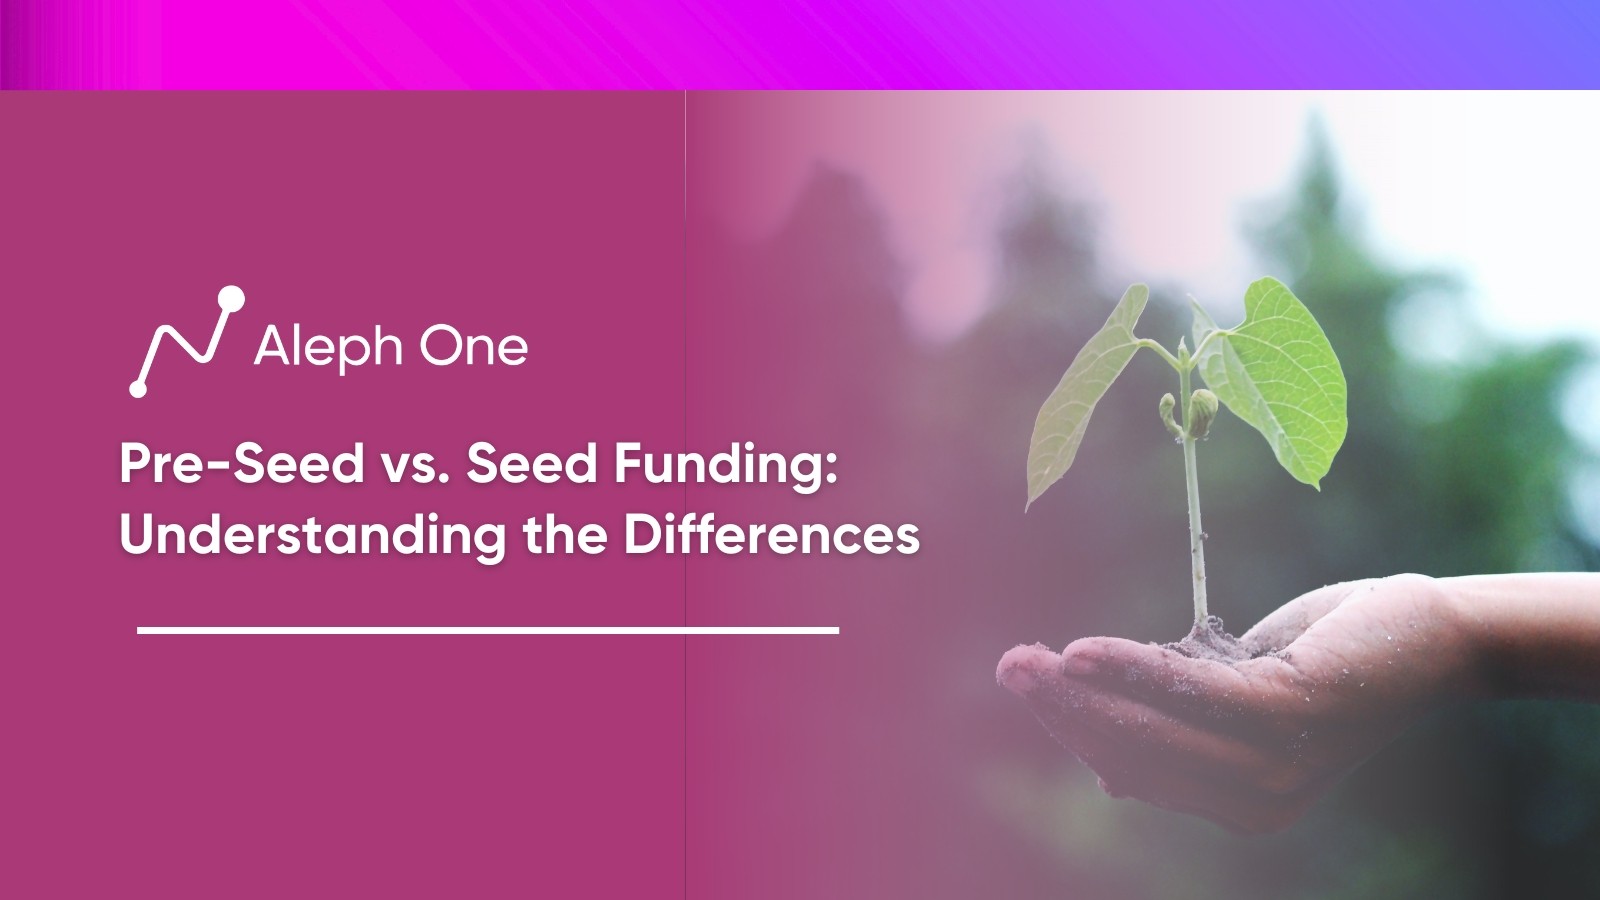 Pre-Seed vs. Seed Funding: Understanding the Differences